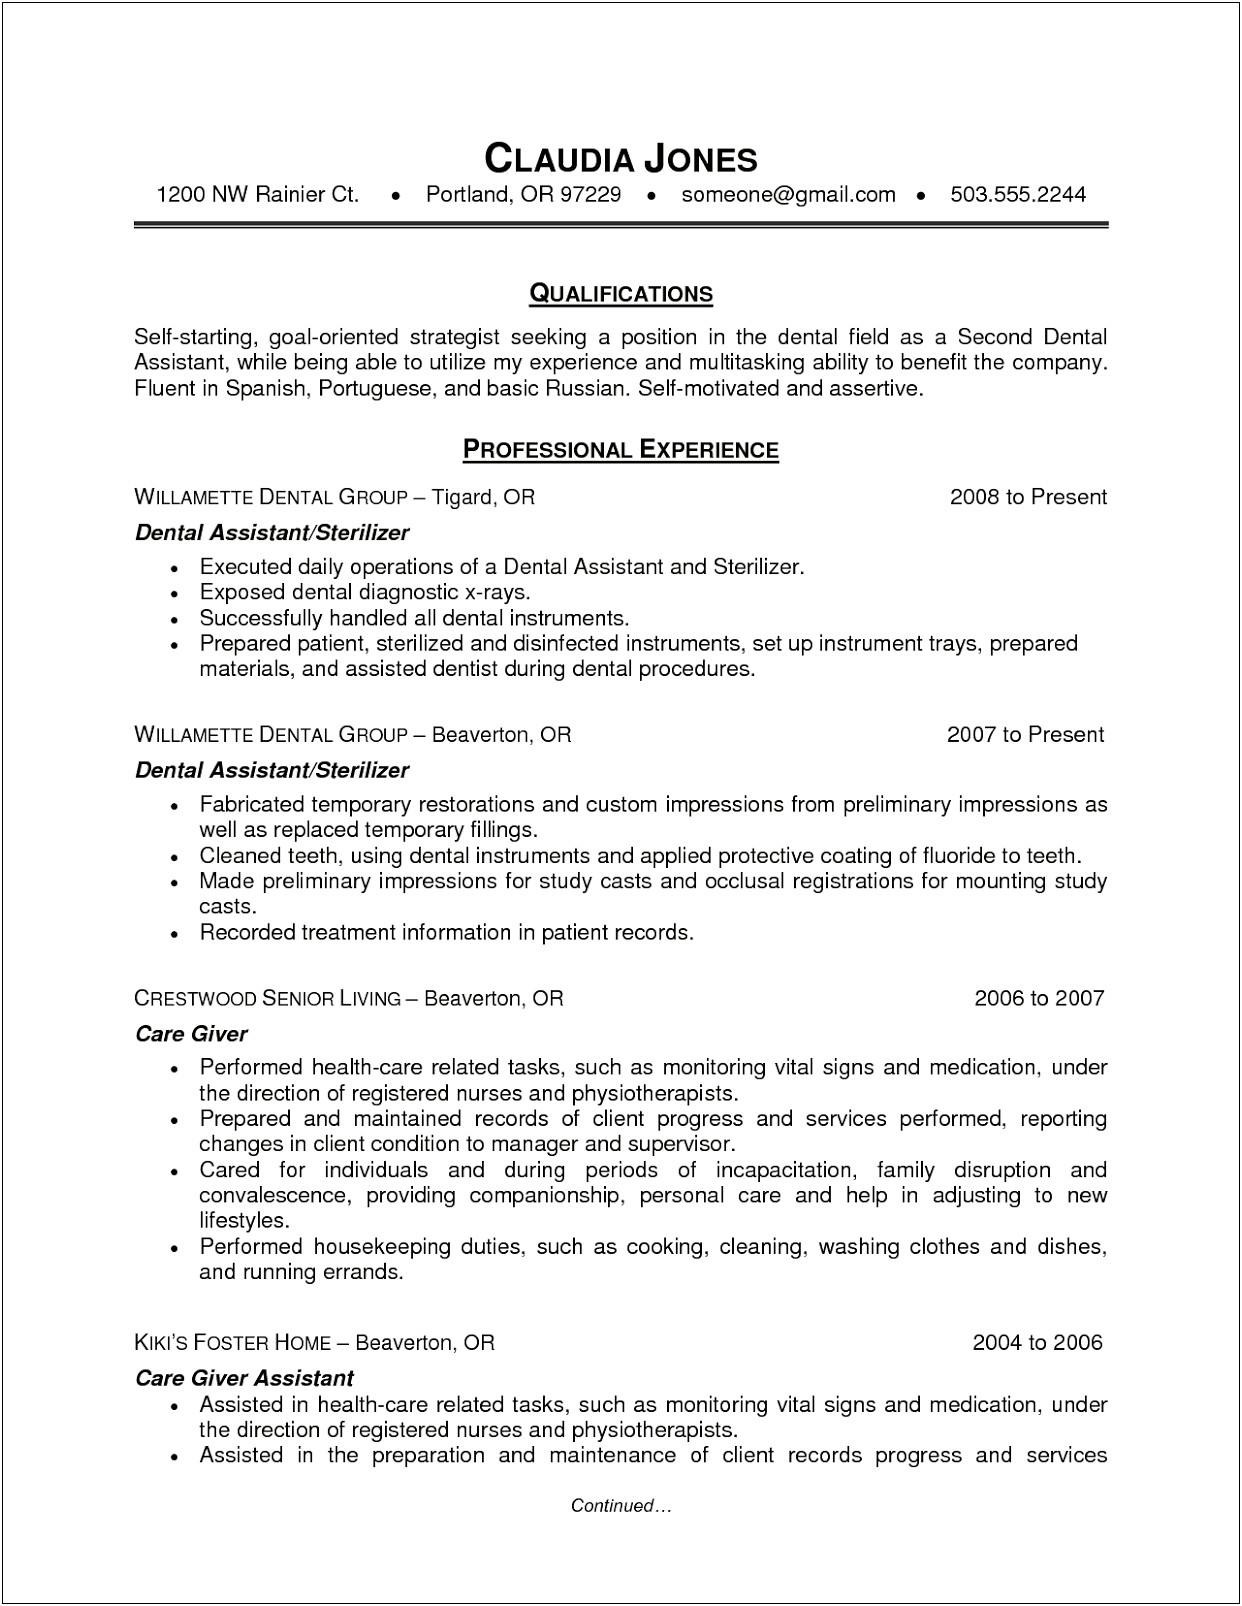 Resume Objective Examples Dental Receptionist